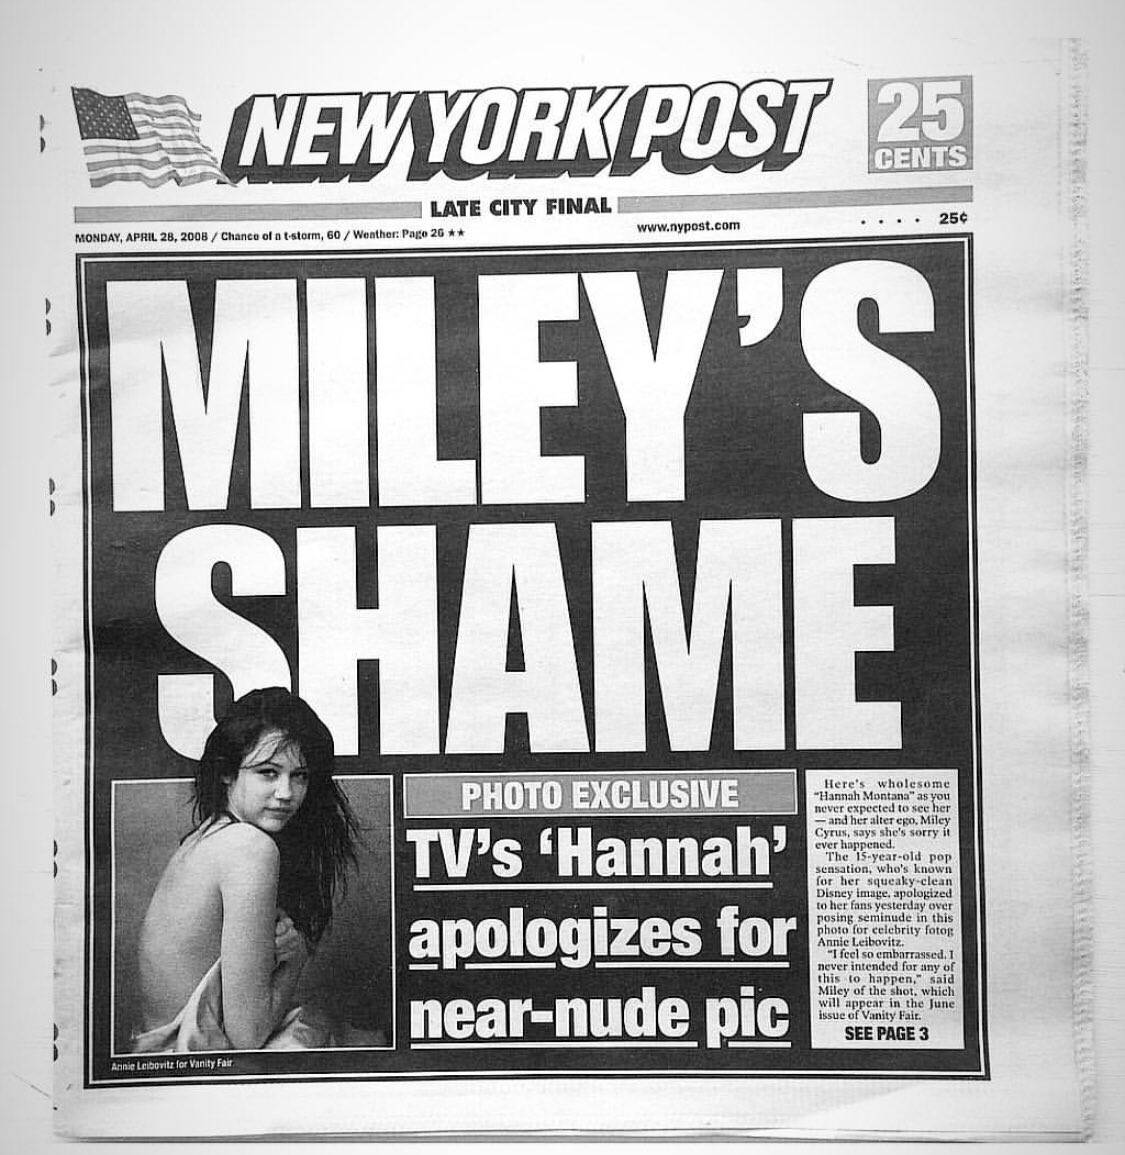 A screenshot of Miley Cyrus' post on her Twitter account from the front page of the newspaper "New York Post"